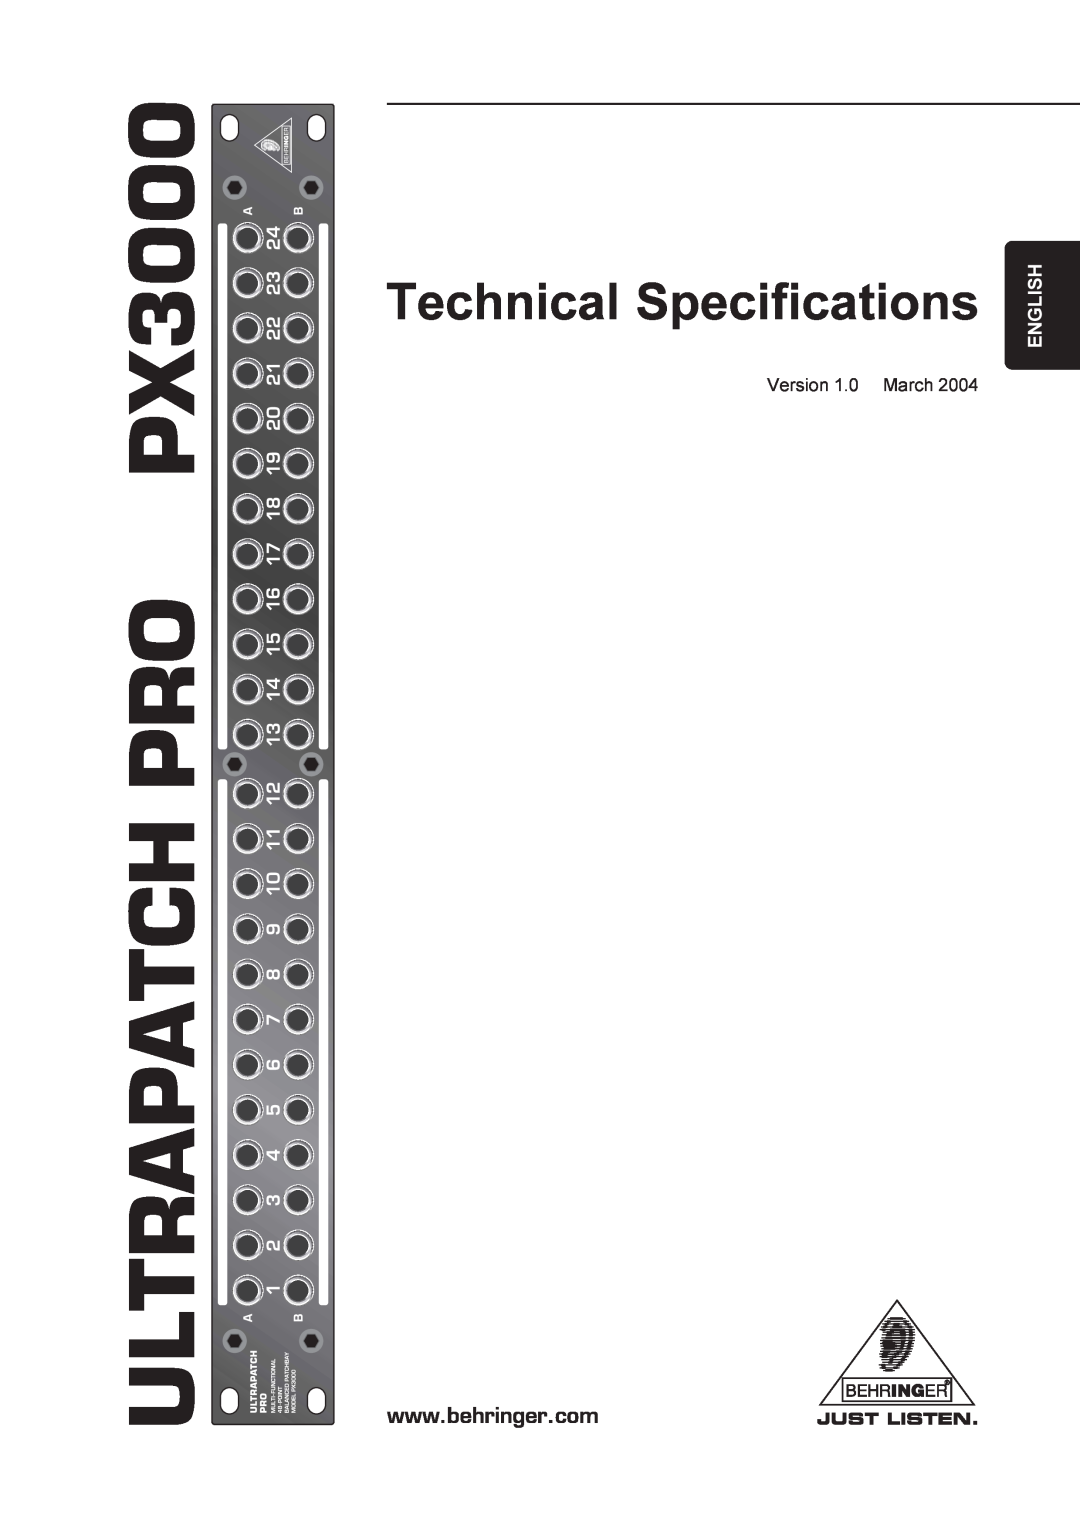 Behringer PX3000 technical specifications English, Ultrapatch Pro, Technical Specifications 